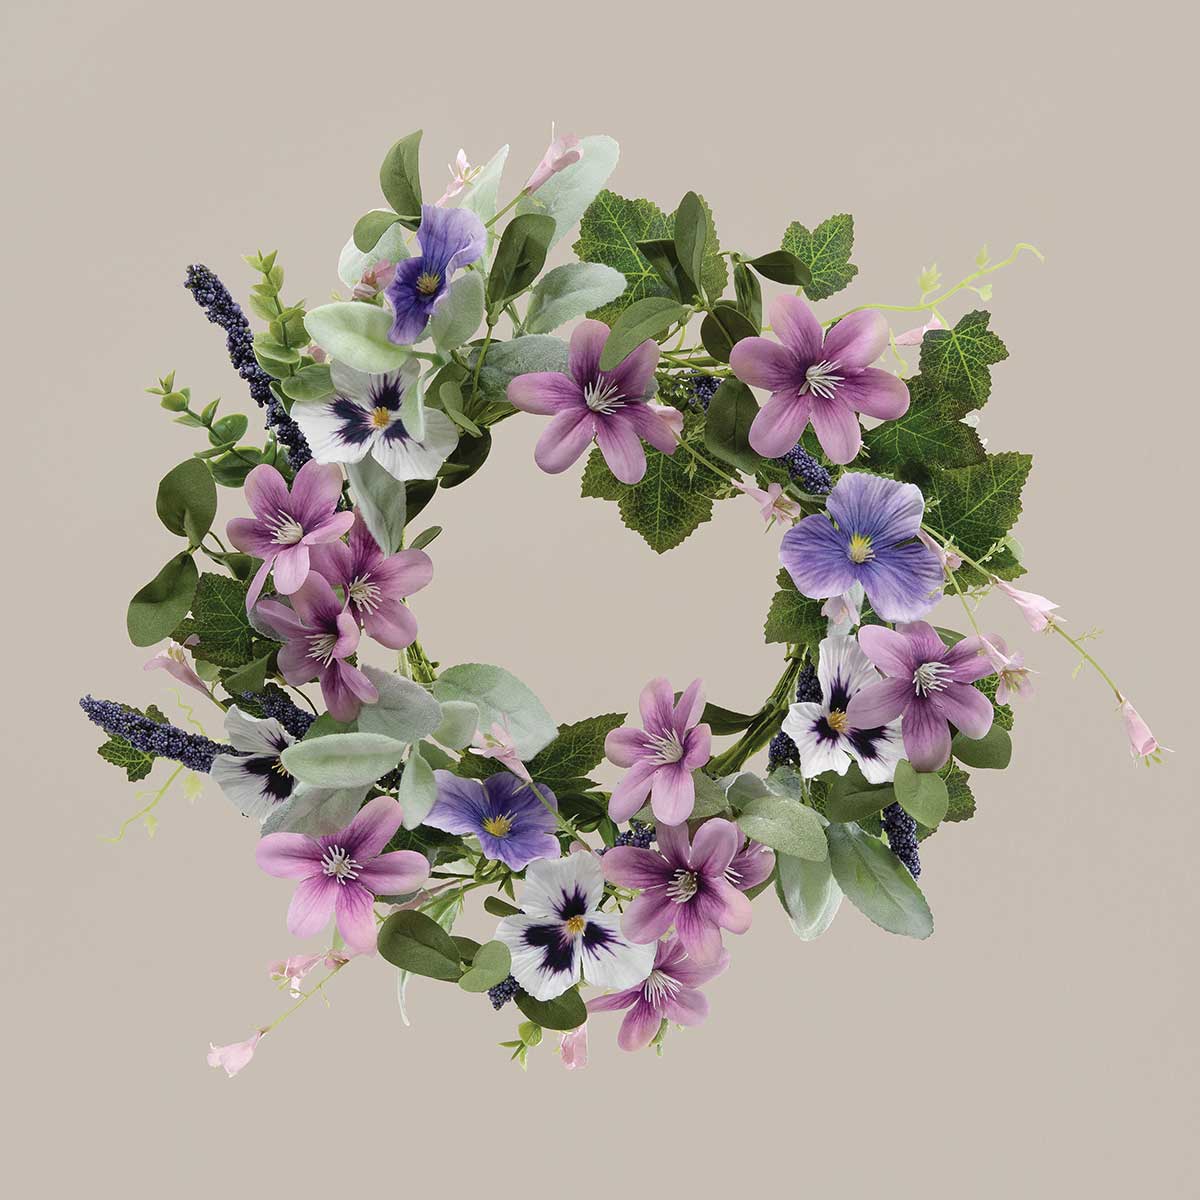 MINI WREATH PANSY BLOSSOM 18IN (INNER RING 6.5IN) PURPLE